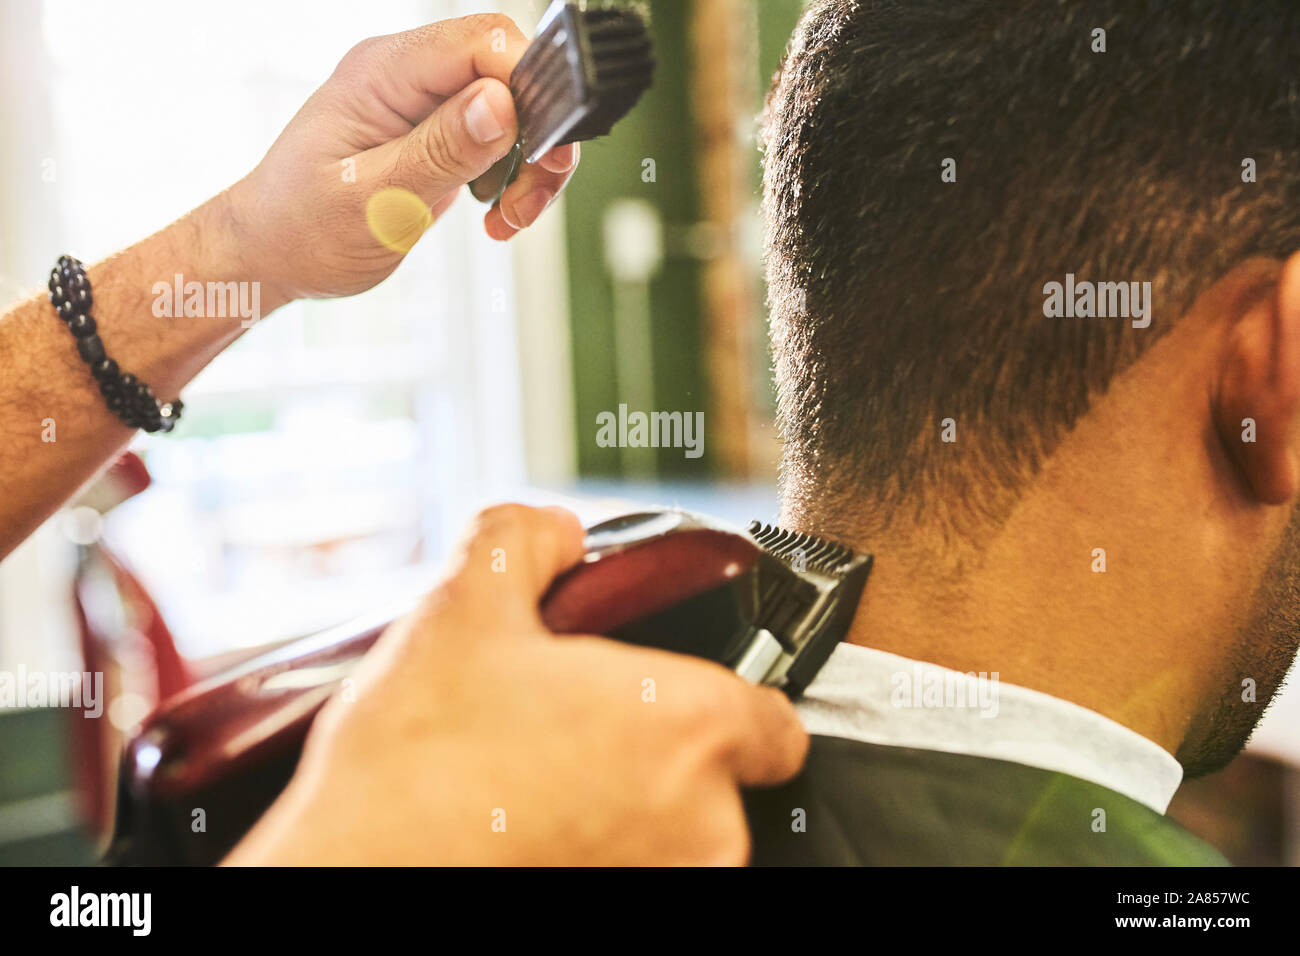 Close up male barber using trimmer on hair of customer Stock Photo